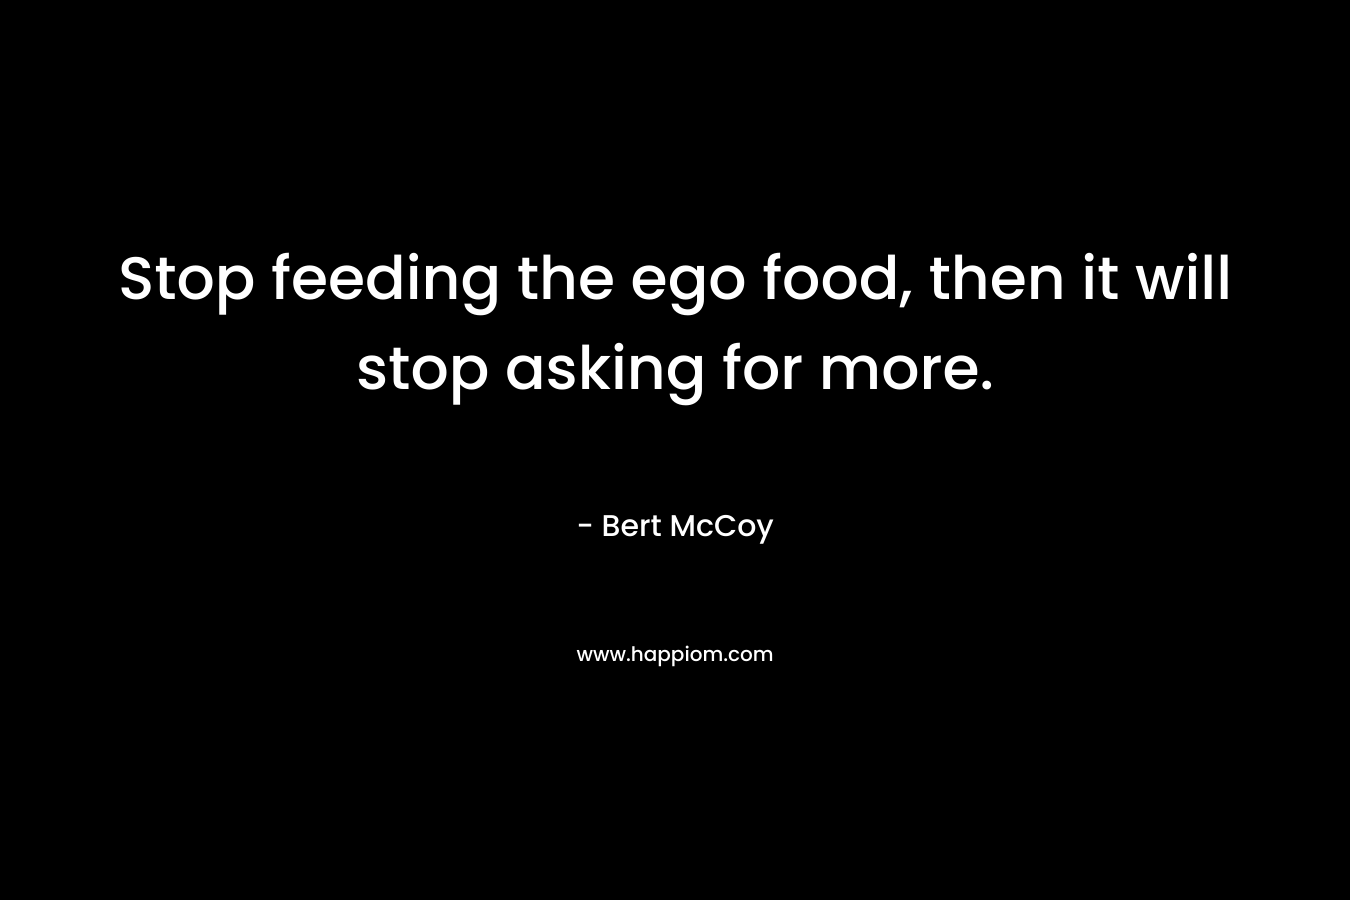 Stop feeding the ego food, then it will stop asking for more.